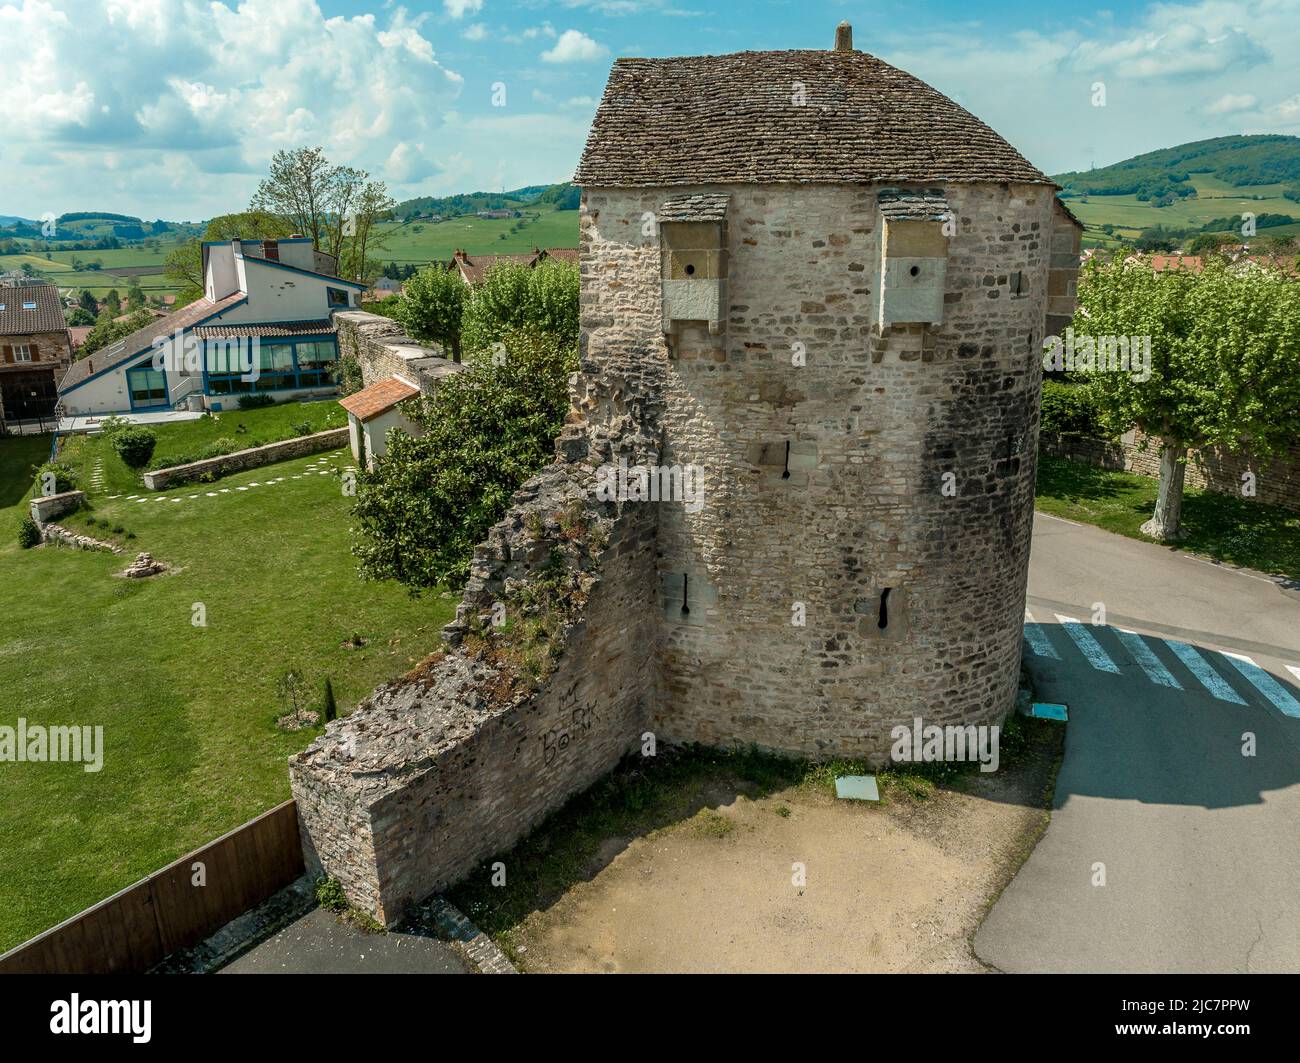 Circular defensive tower with loopholes piercing the town walls of Cluny protecting the ancient religious center and abbey Stock Photo